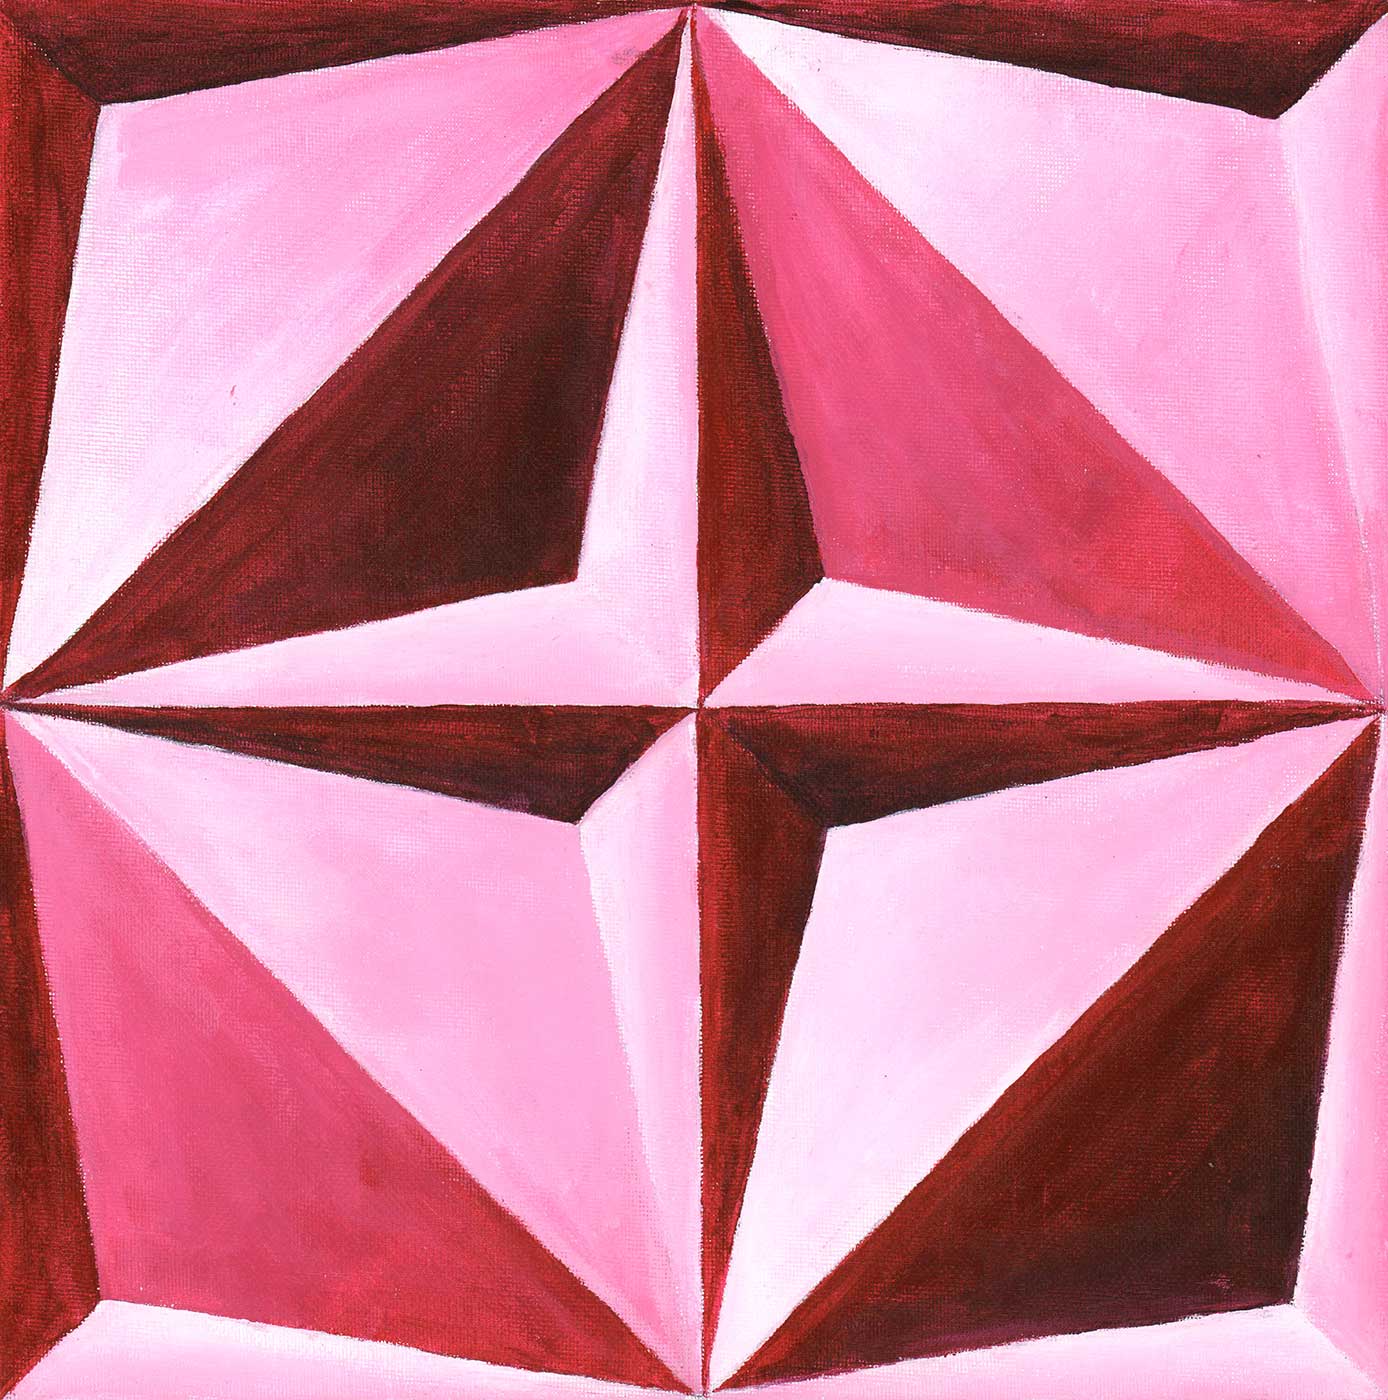 acrylic painting of a three-dimensional shape that showcases triangles and a four point star.